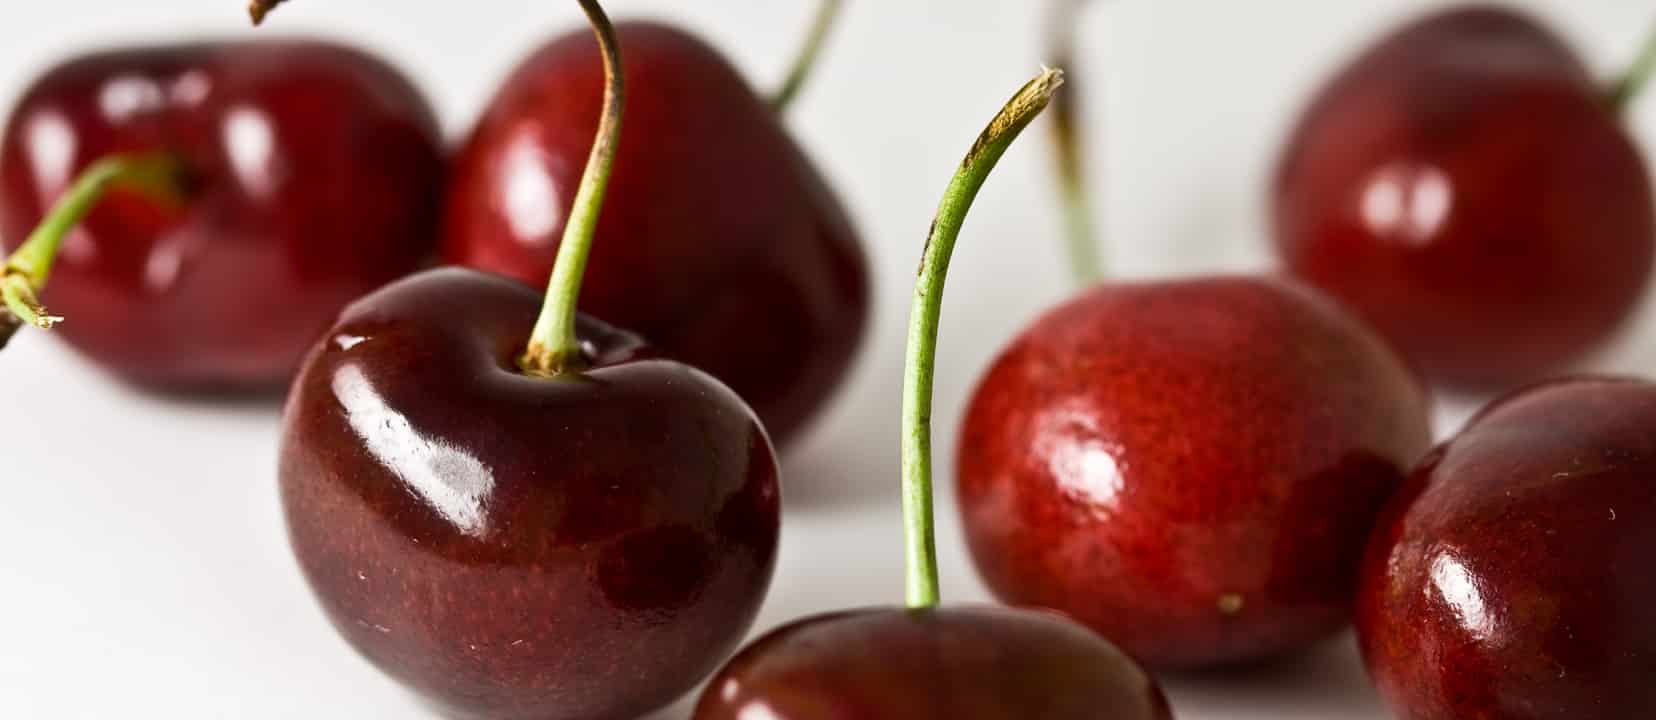 using cherries to treat gout | nutritionfacts